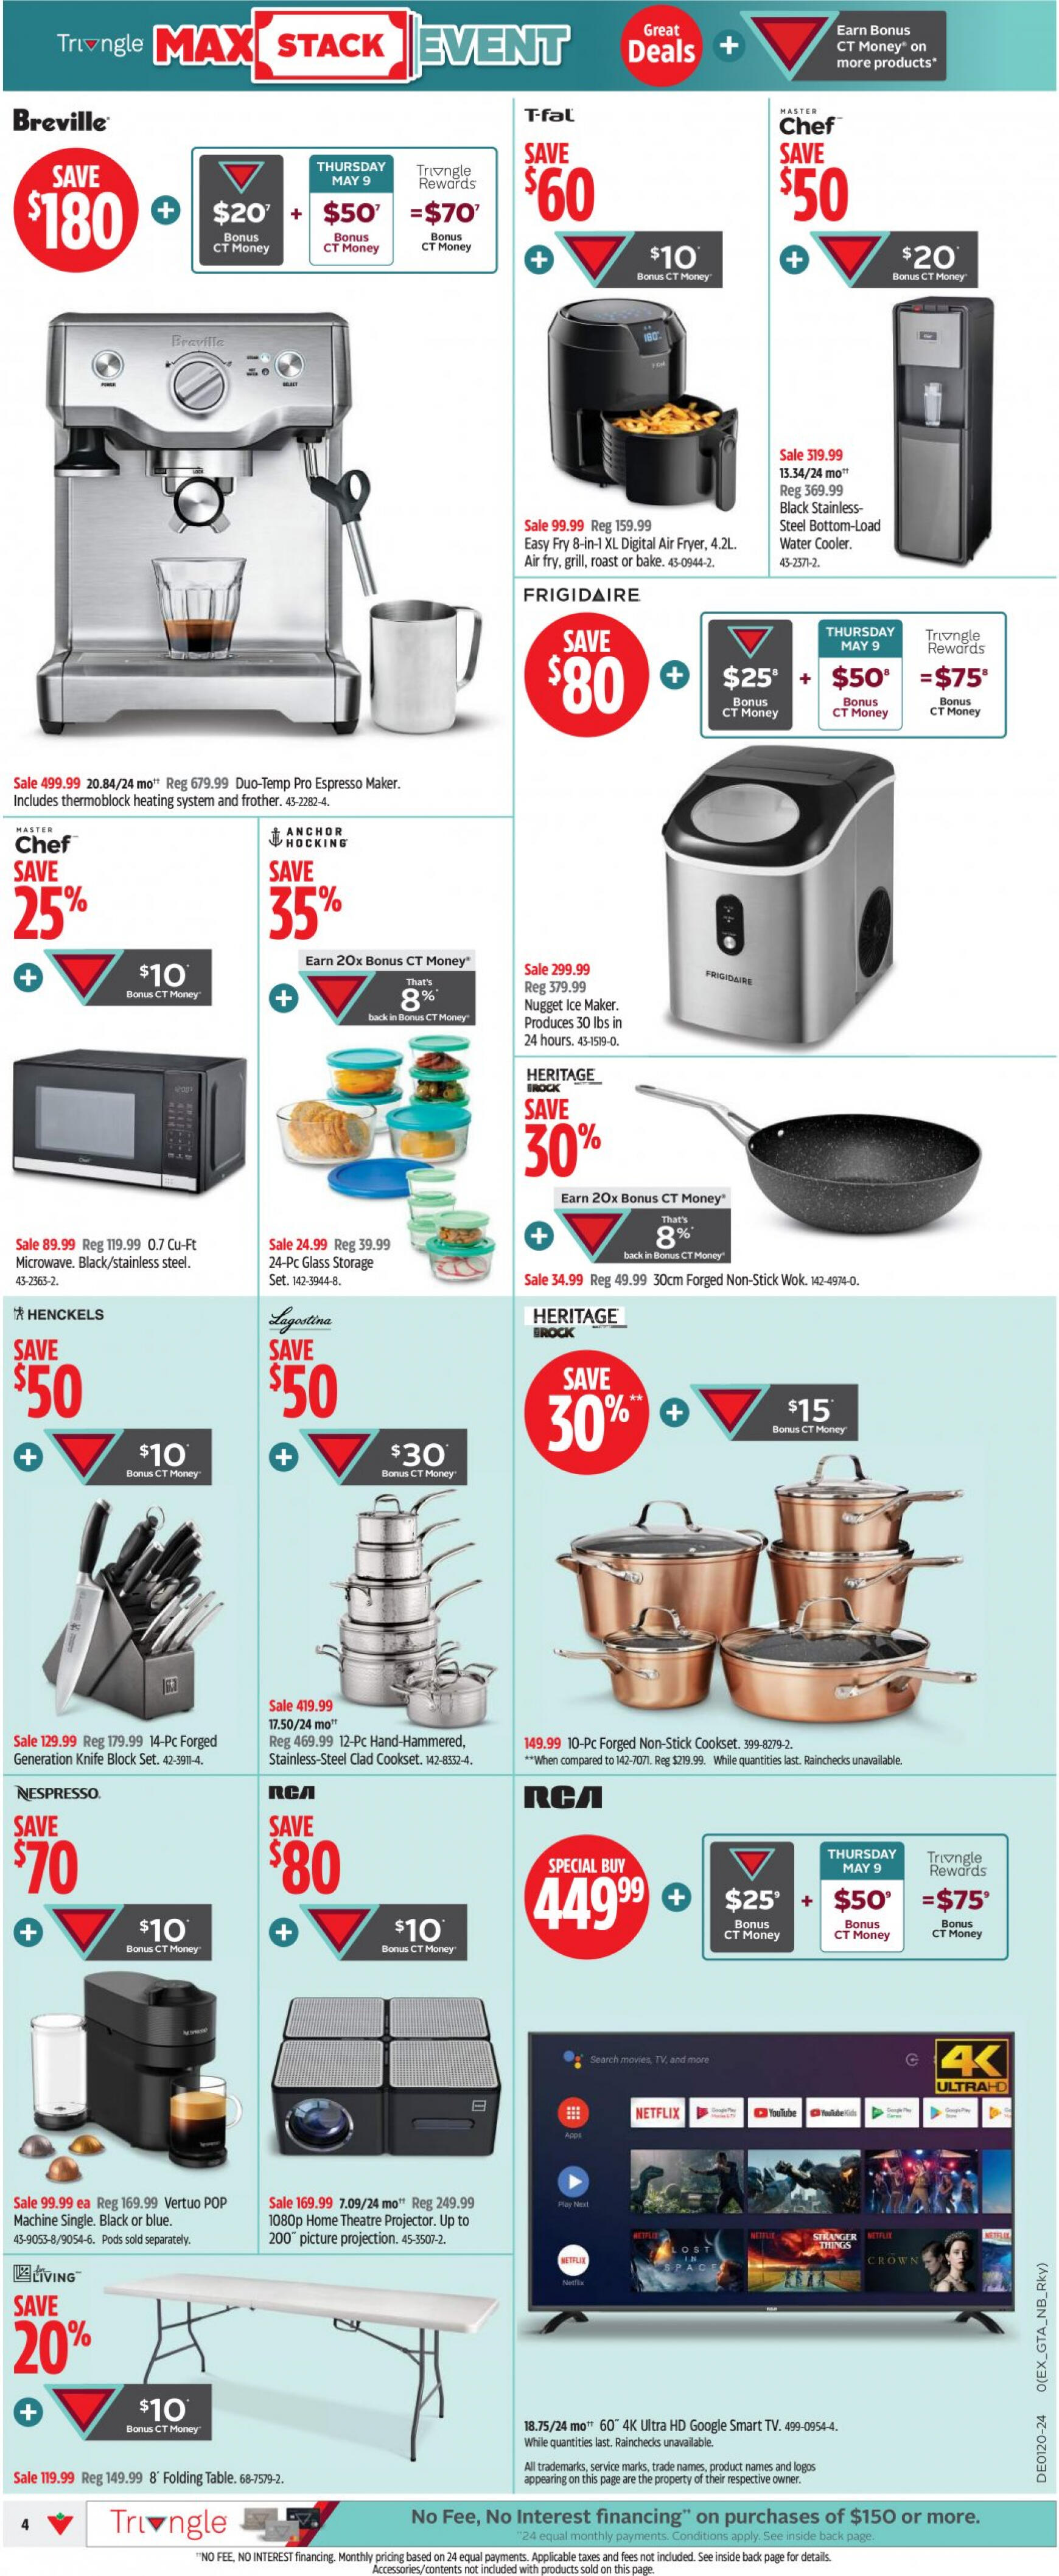 canadian-tire - Canadian Tire flyer current 09.05. - 15.05. - page: 4